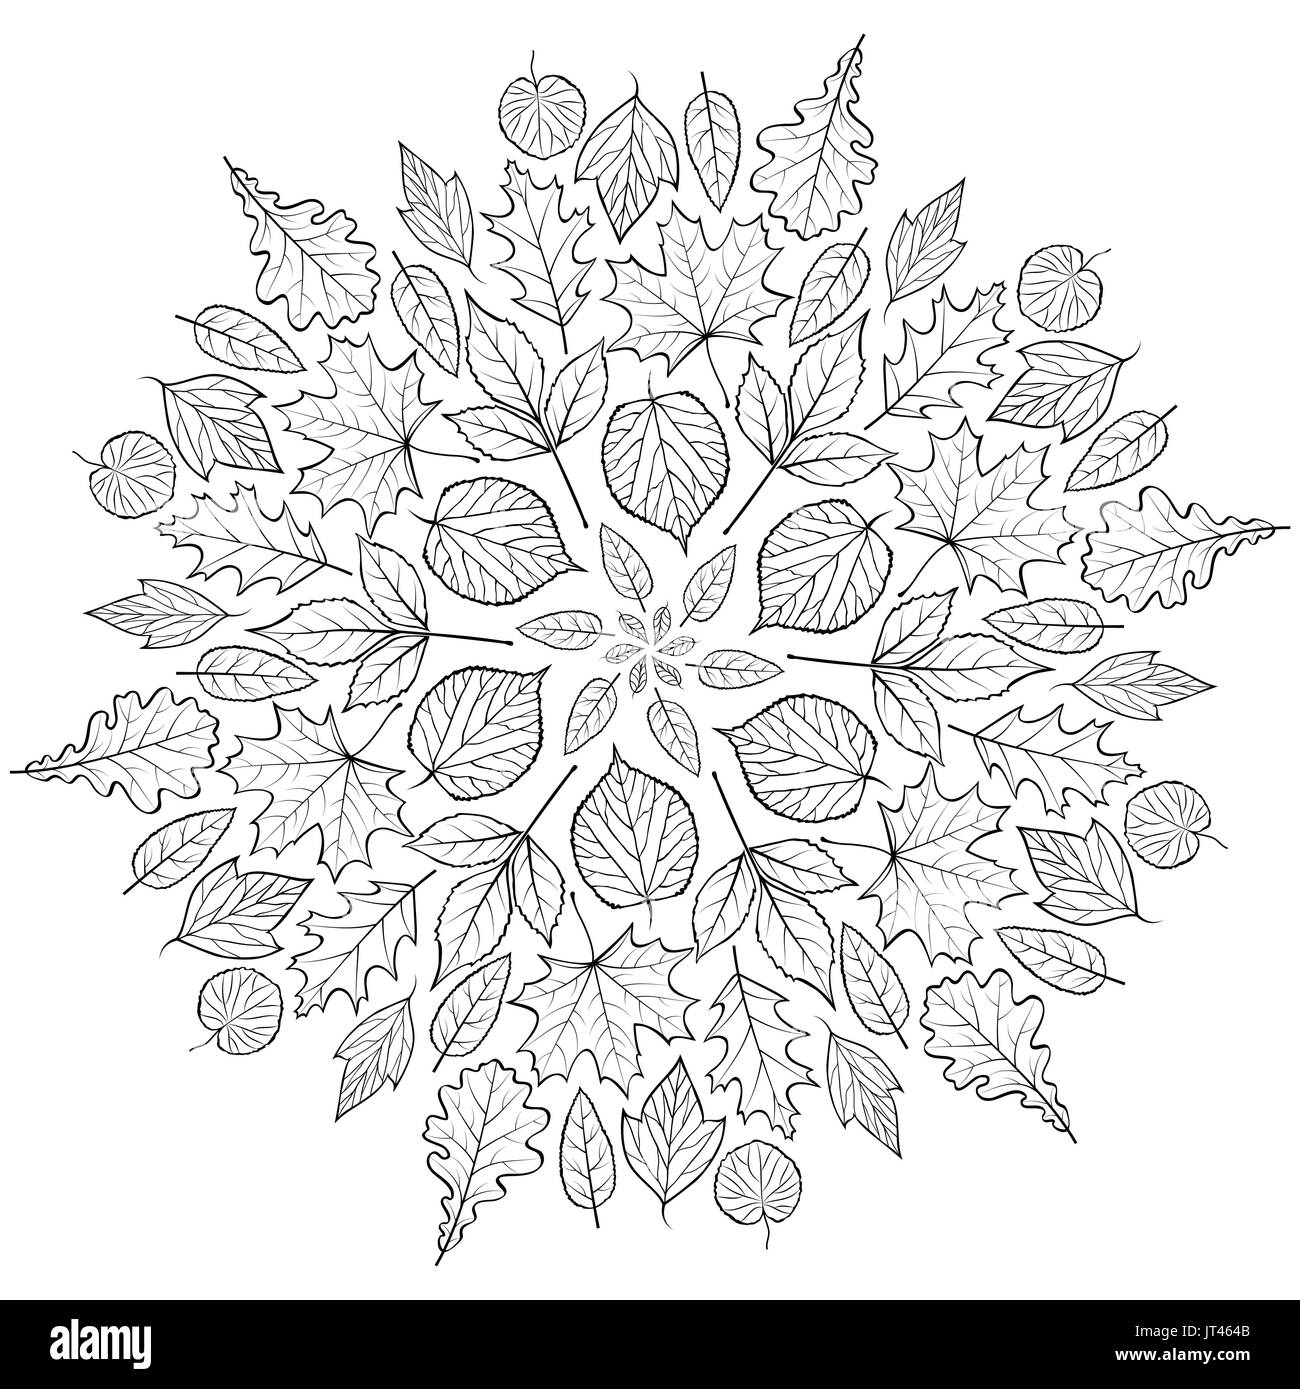 Autumn mandala with autumn leaves on white background. Coloring page ...